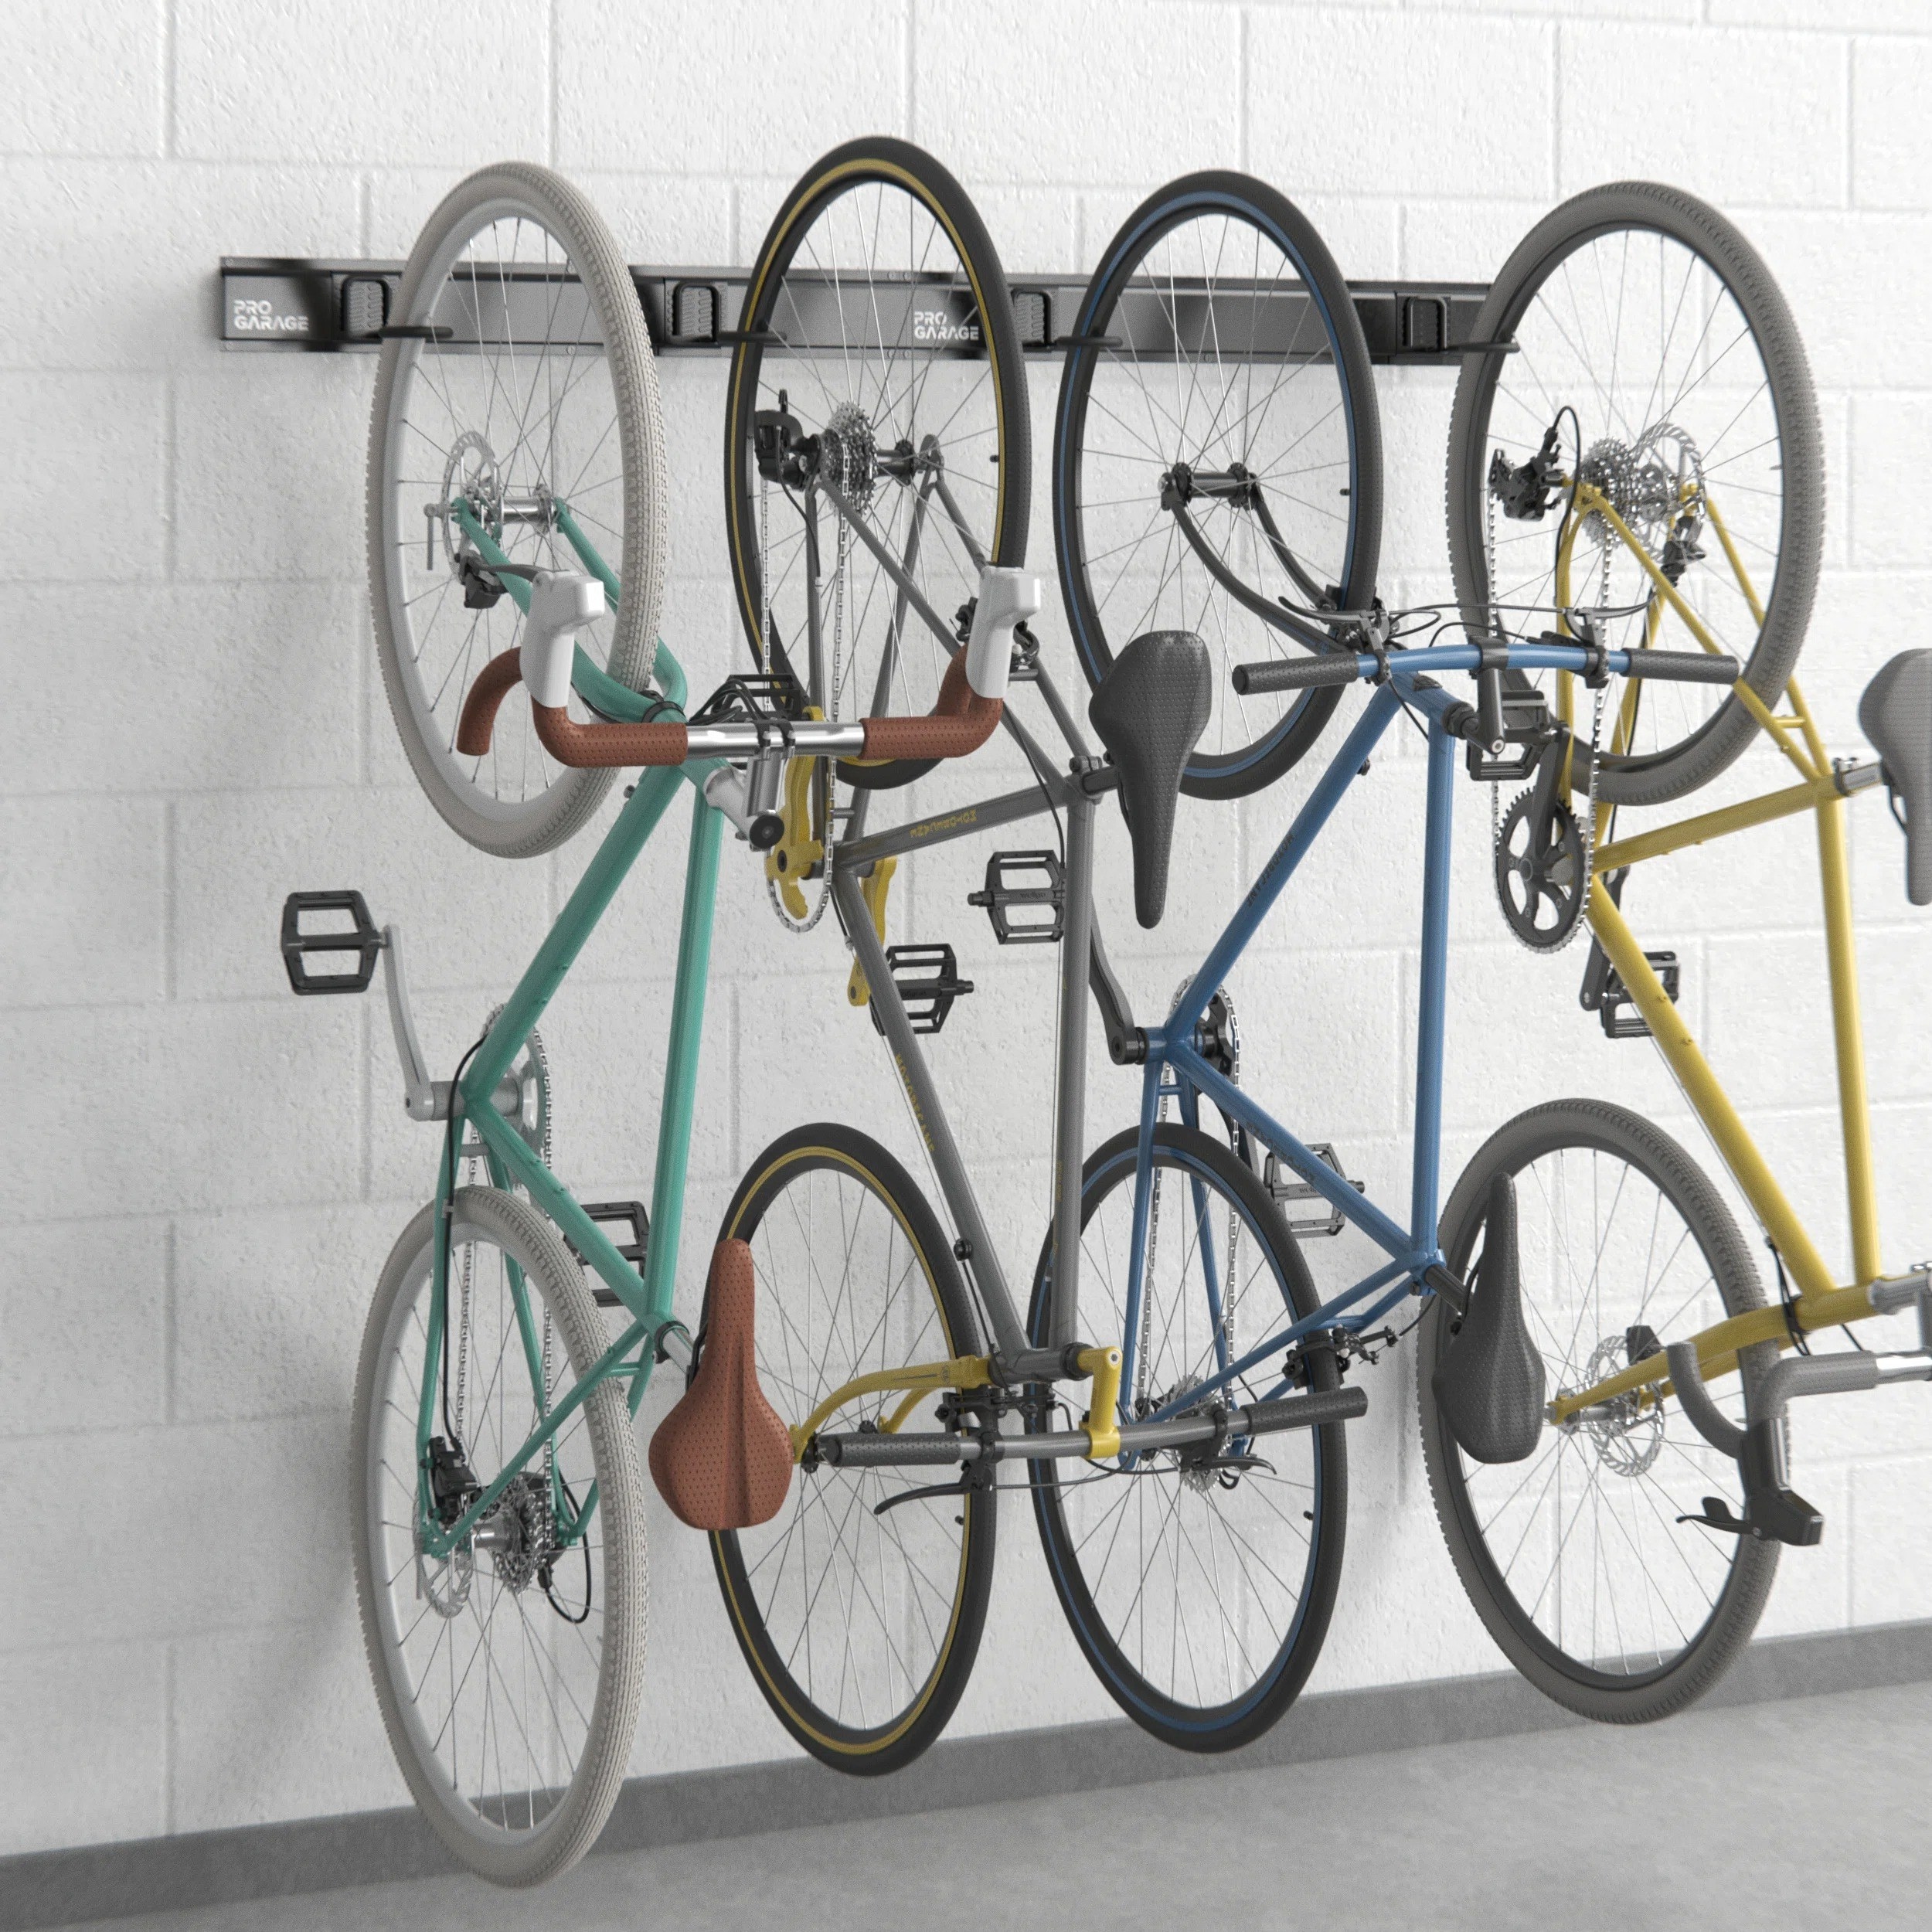 four bikes hanging from the bike rack on a wall